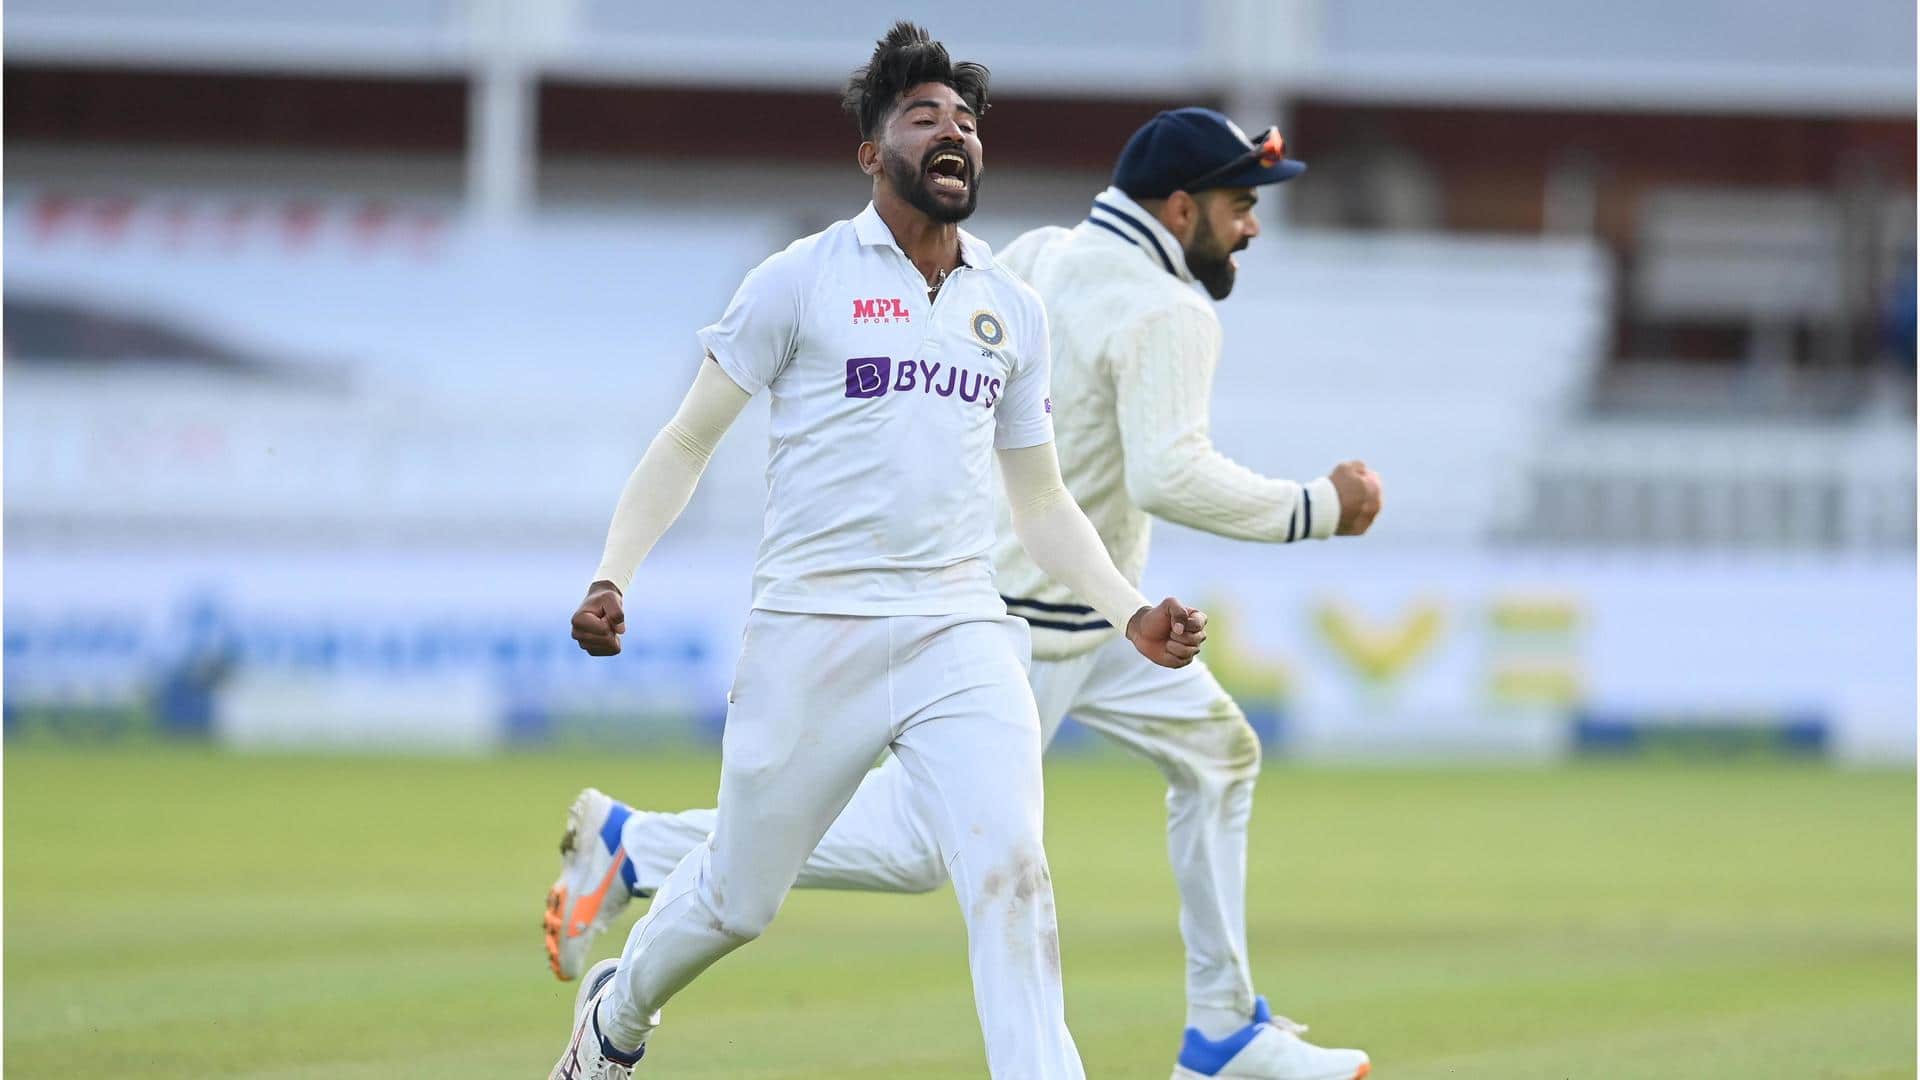 WTC final, Mohammed Siraj races to 50 Test wickets: Stats